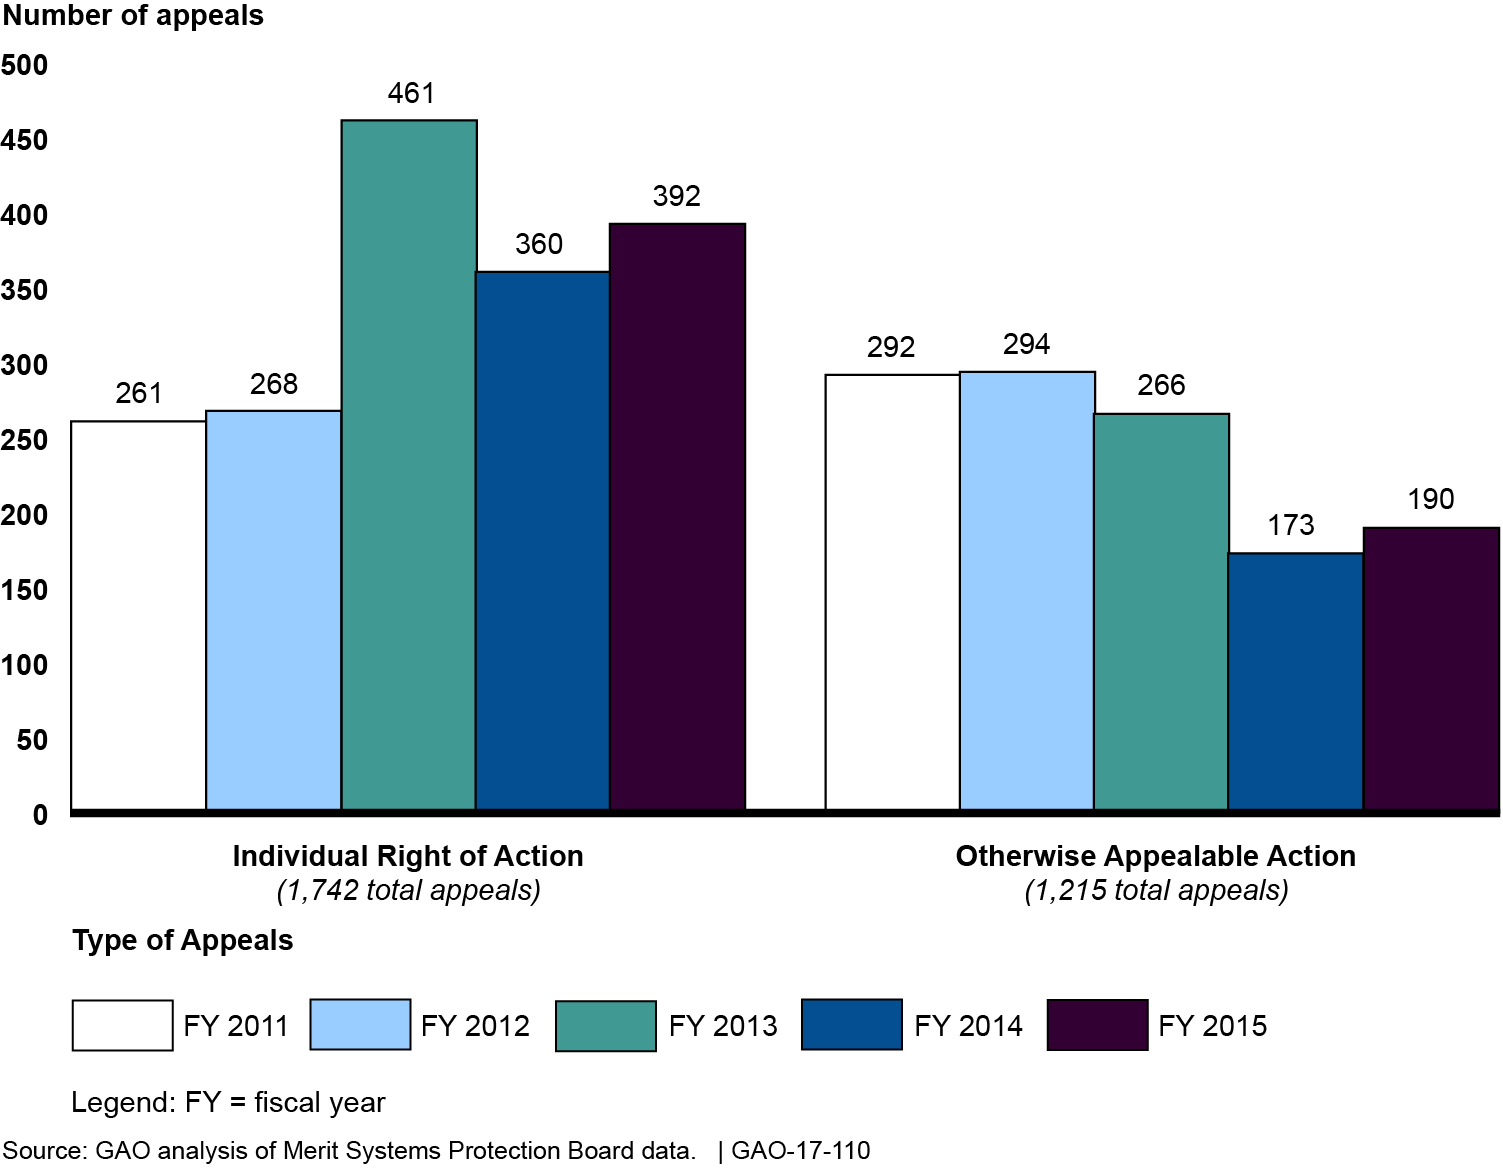 Bar chart showing increases in the number of individual right of action appeals in FYs 13, 14 & 15 